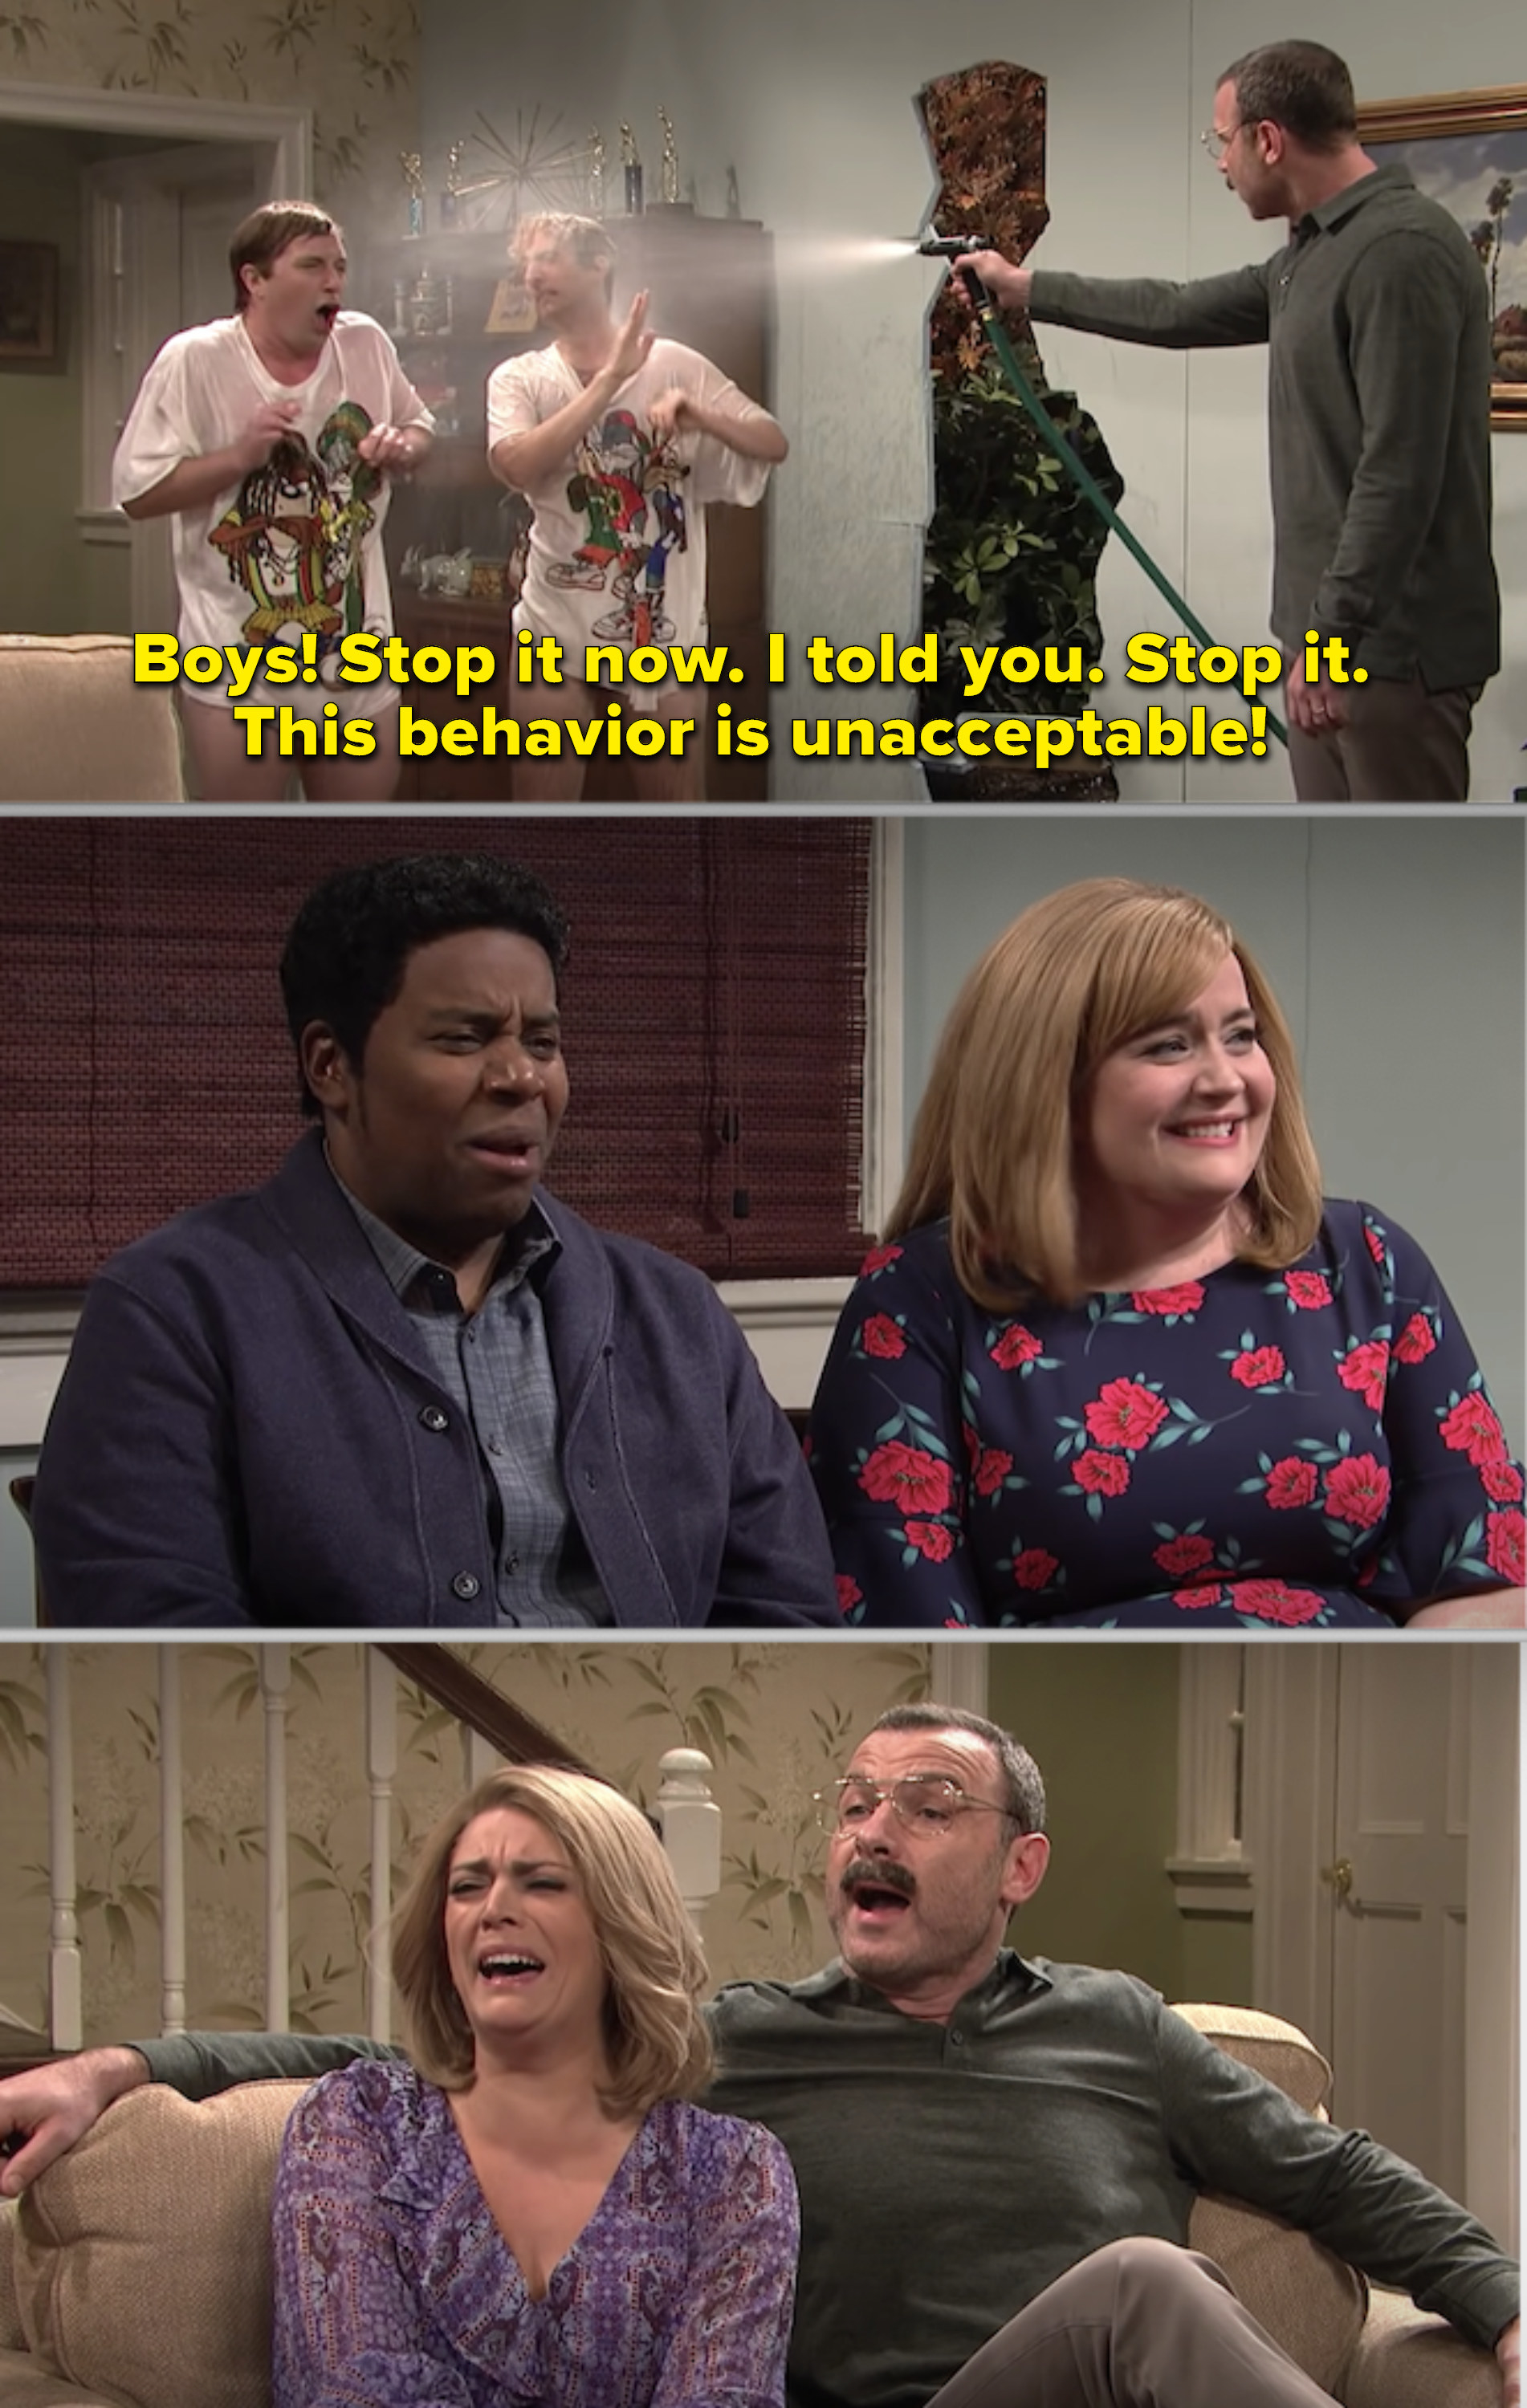 Three separate scenes from a skit with text: &quot;Boys! Stop it now. I told you. Stop it. This behavior is unacceptable!&quot;